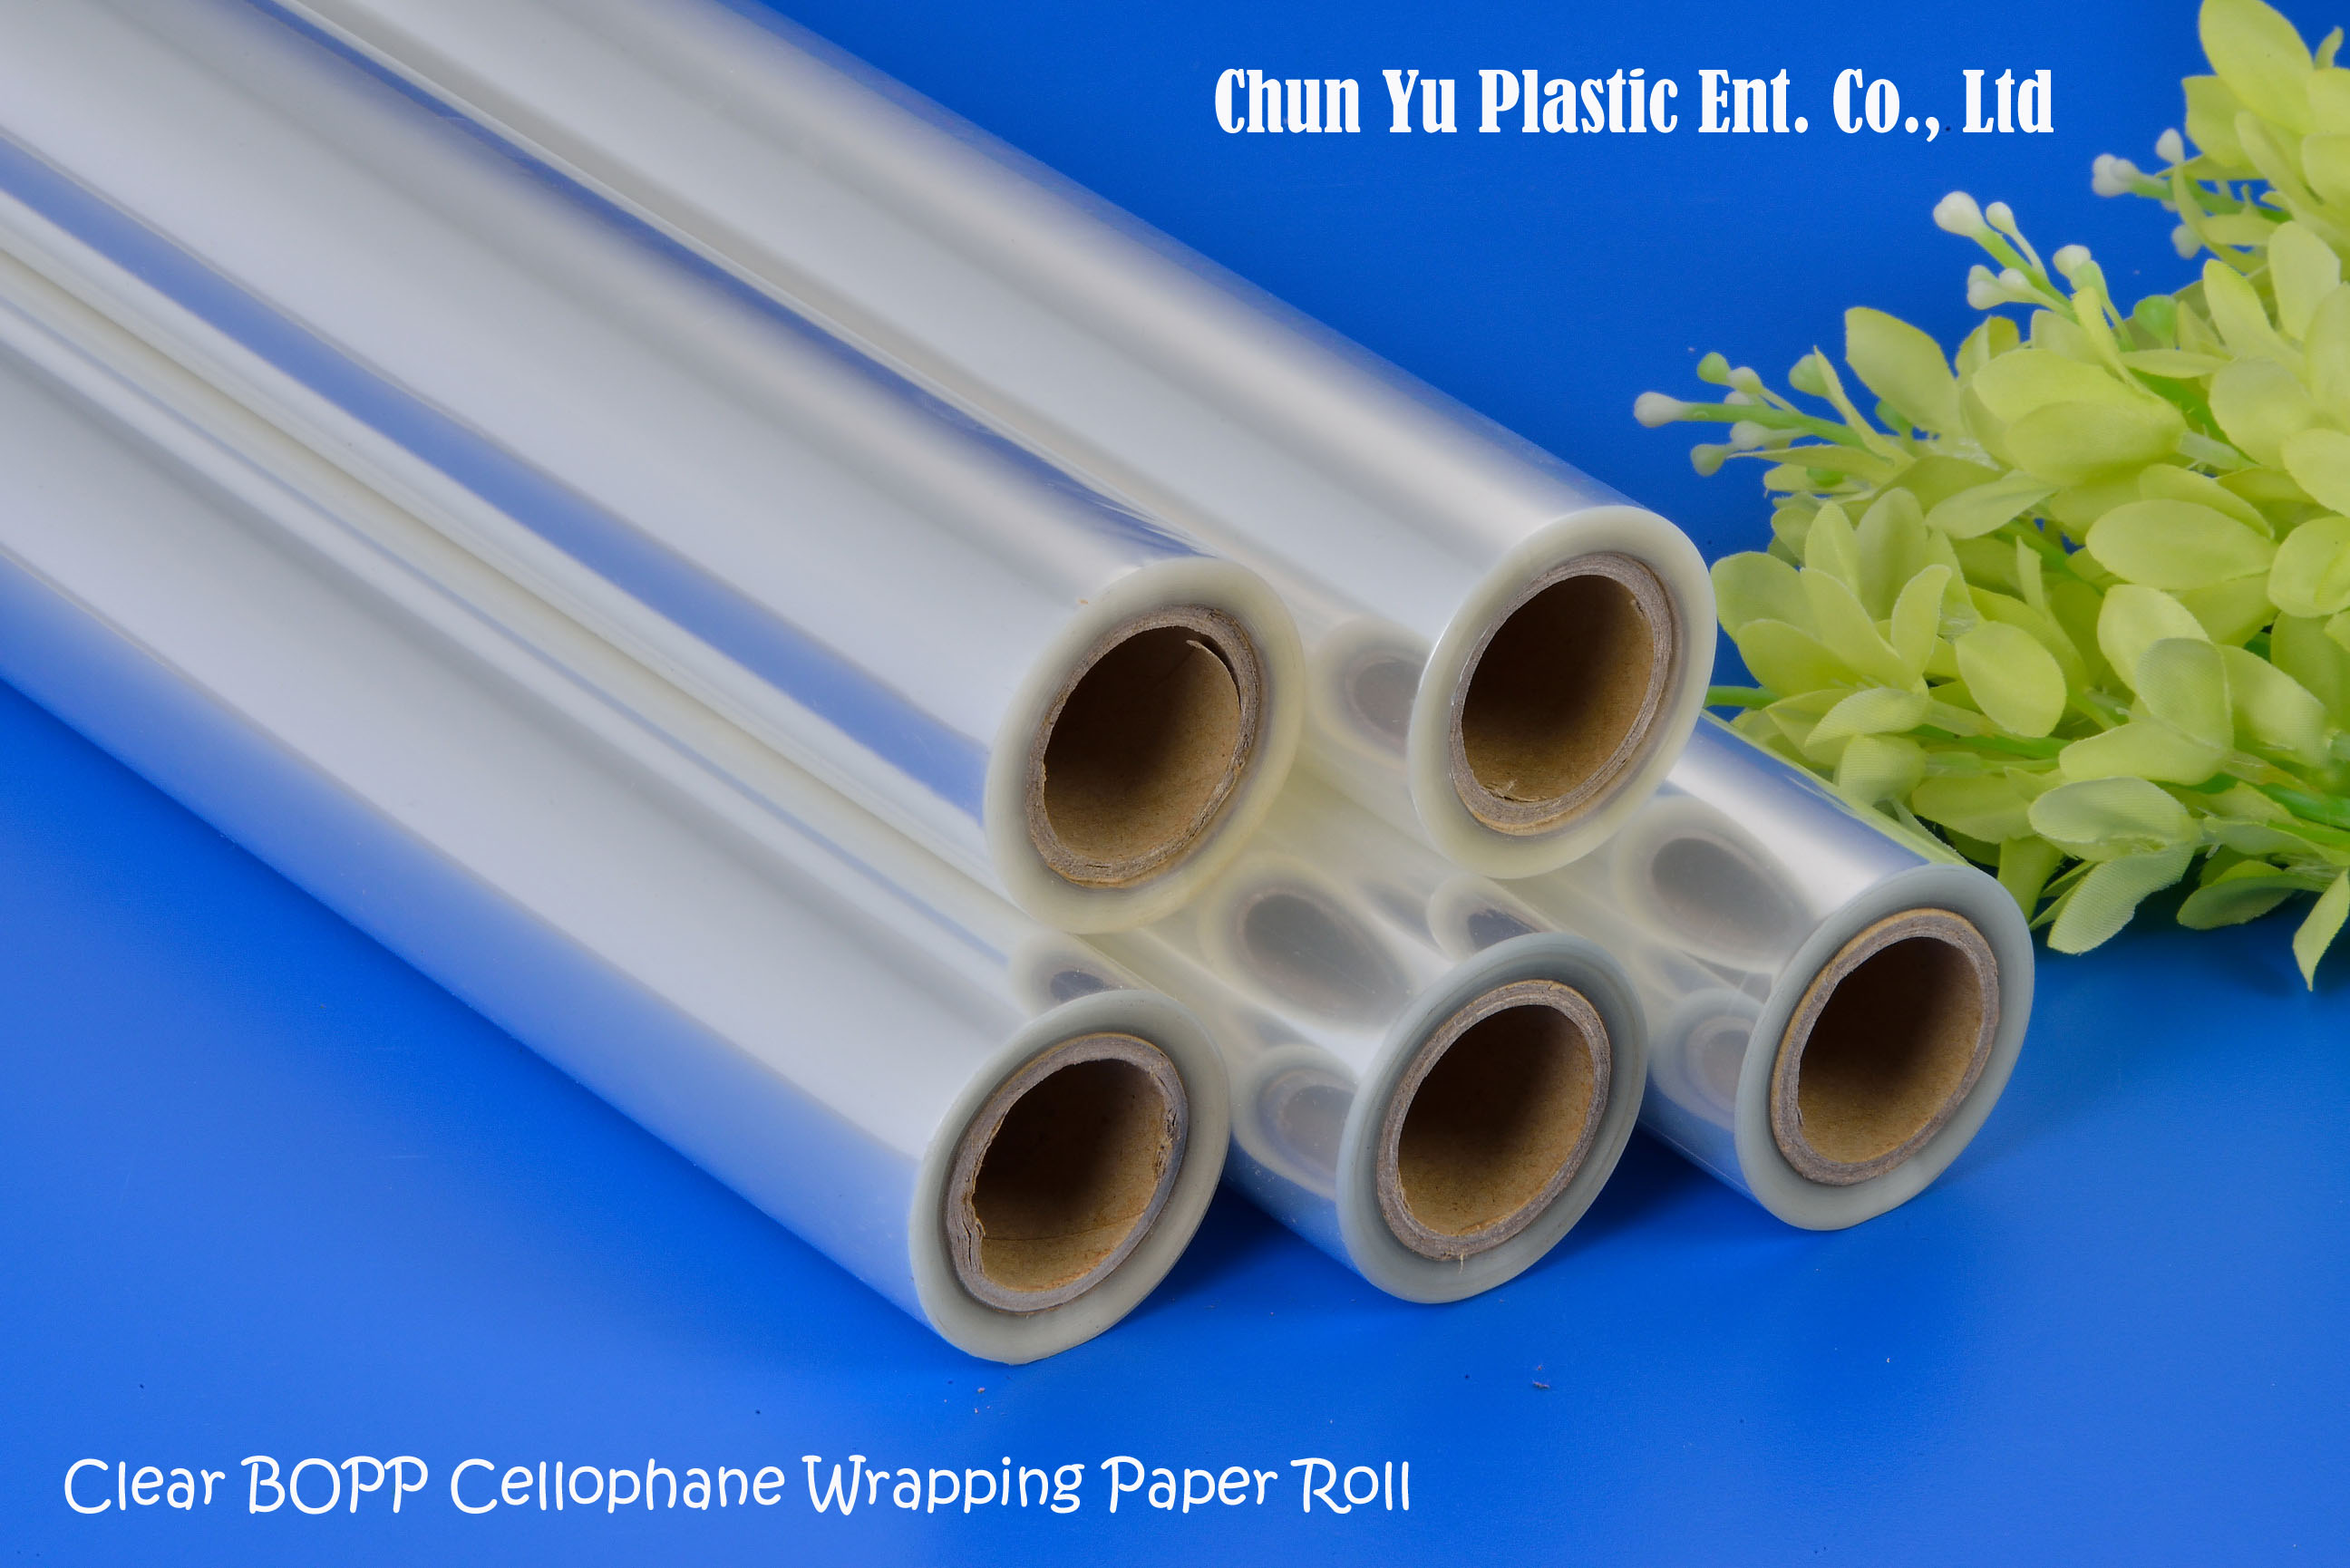 What Is The Difference Between Plastic Wrap And Cellophane?